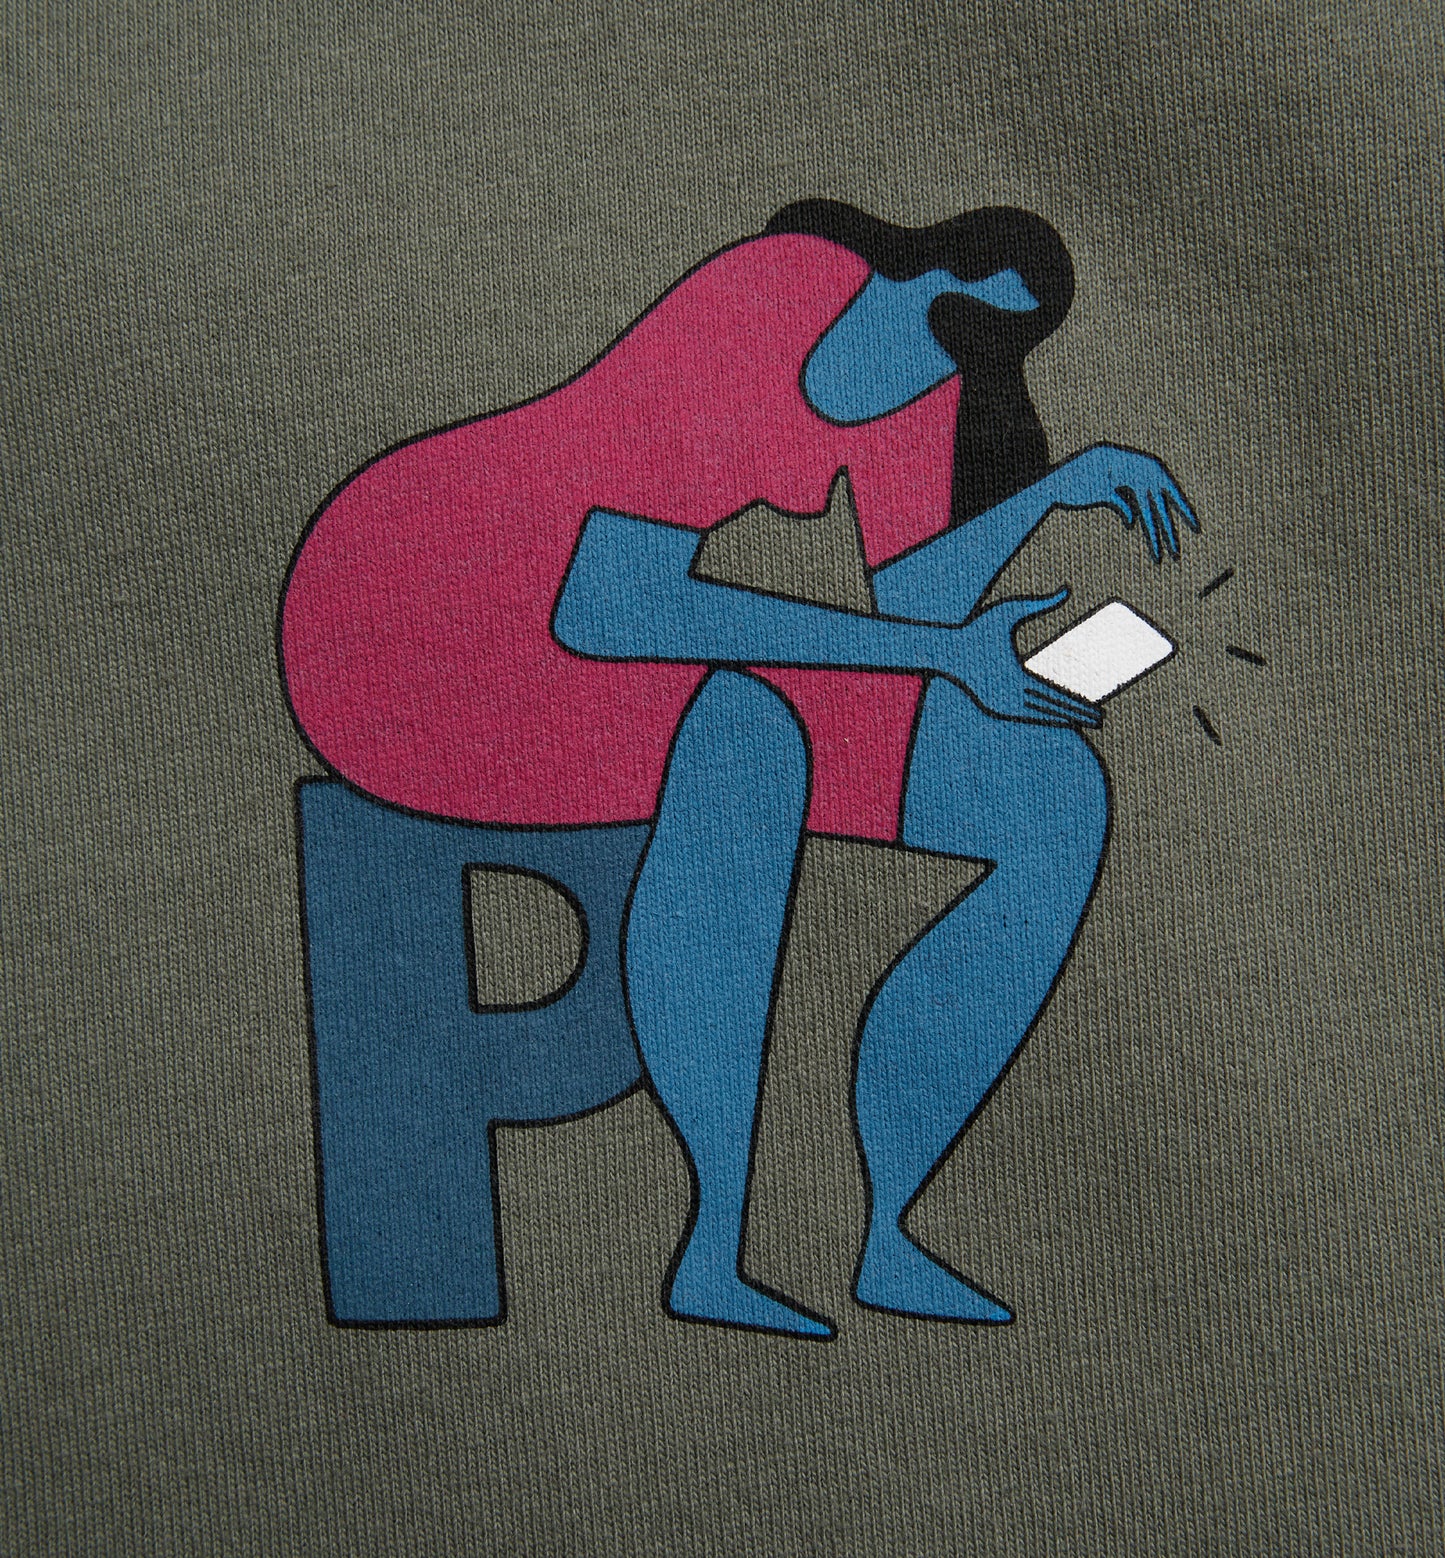 By Parra Insecure Days T-Shirt Greyishgreen